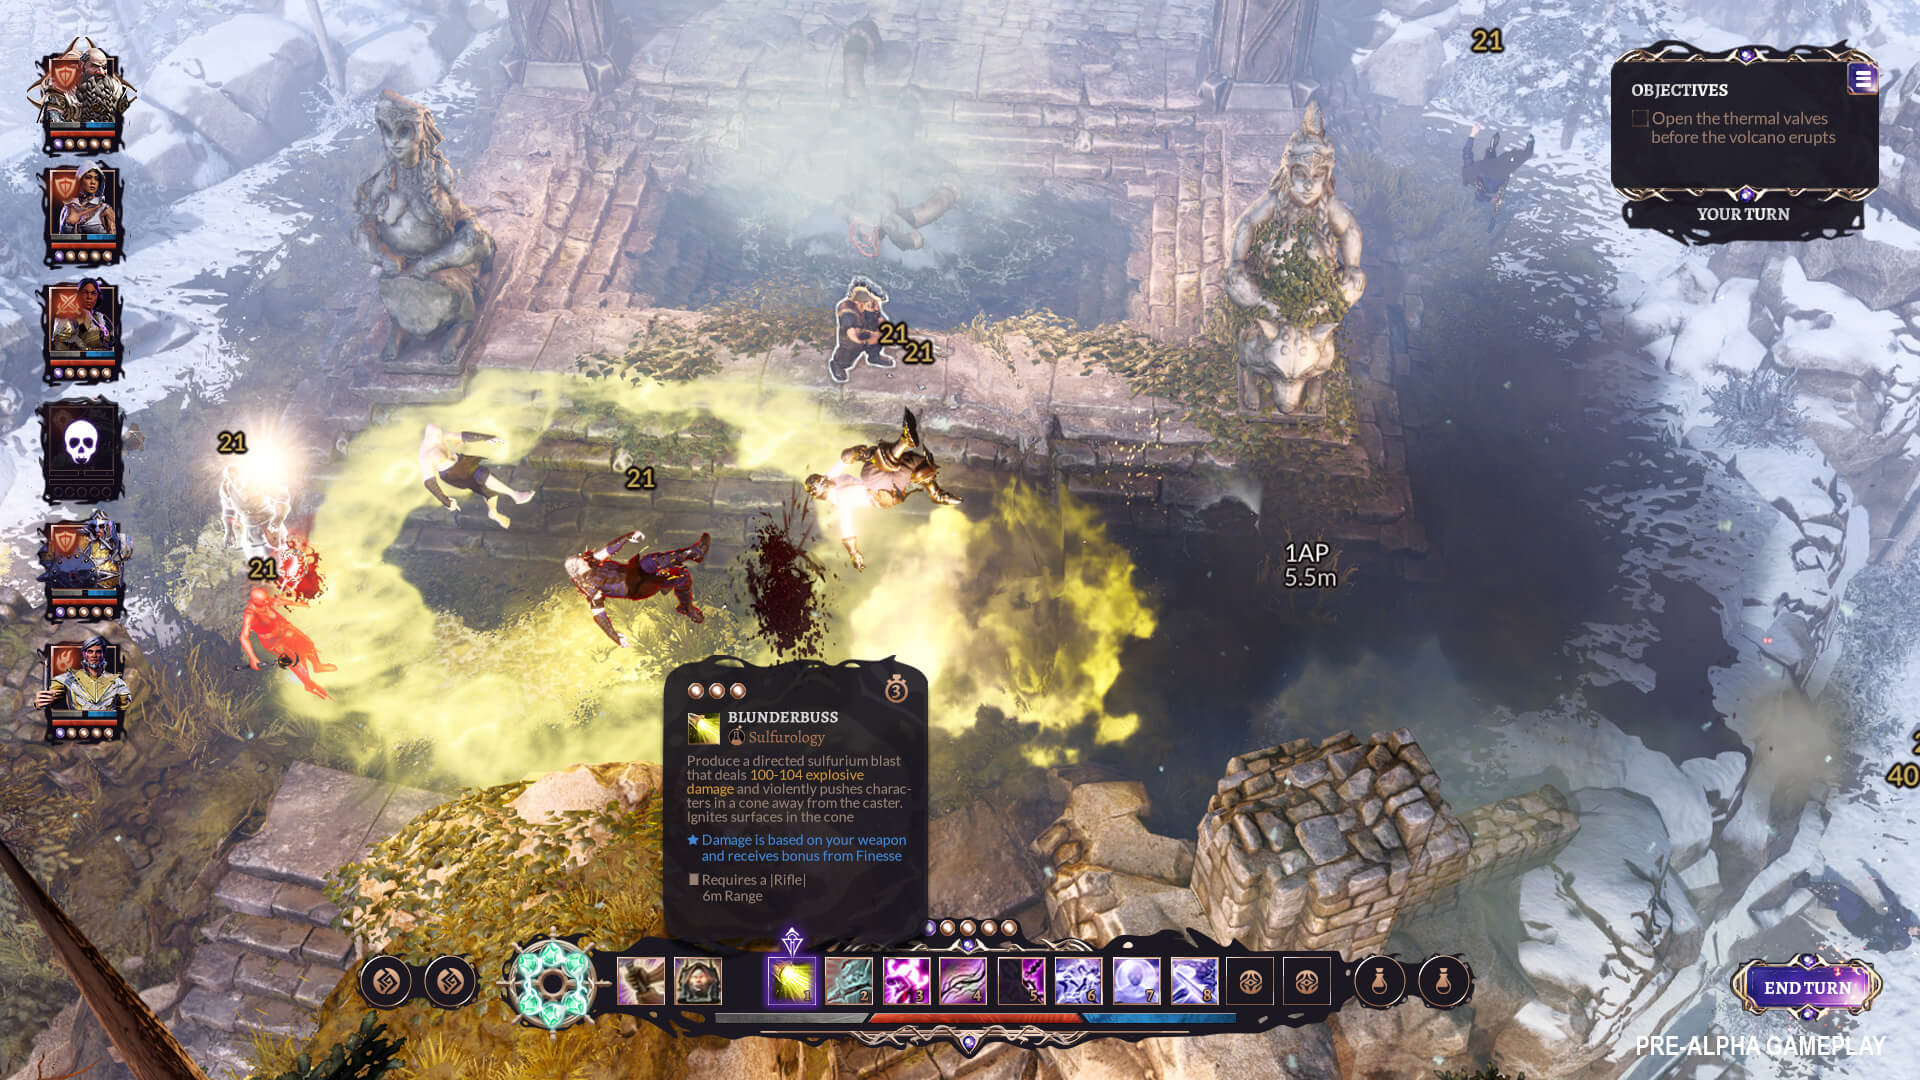 The Consequences Of Individual Choices Highlighted In New RPG Title Divinity: Fallen Heroes